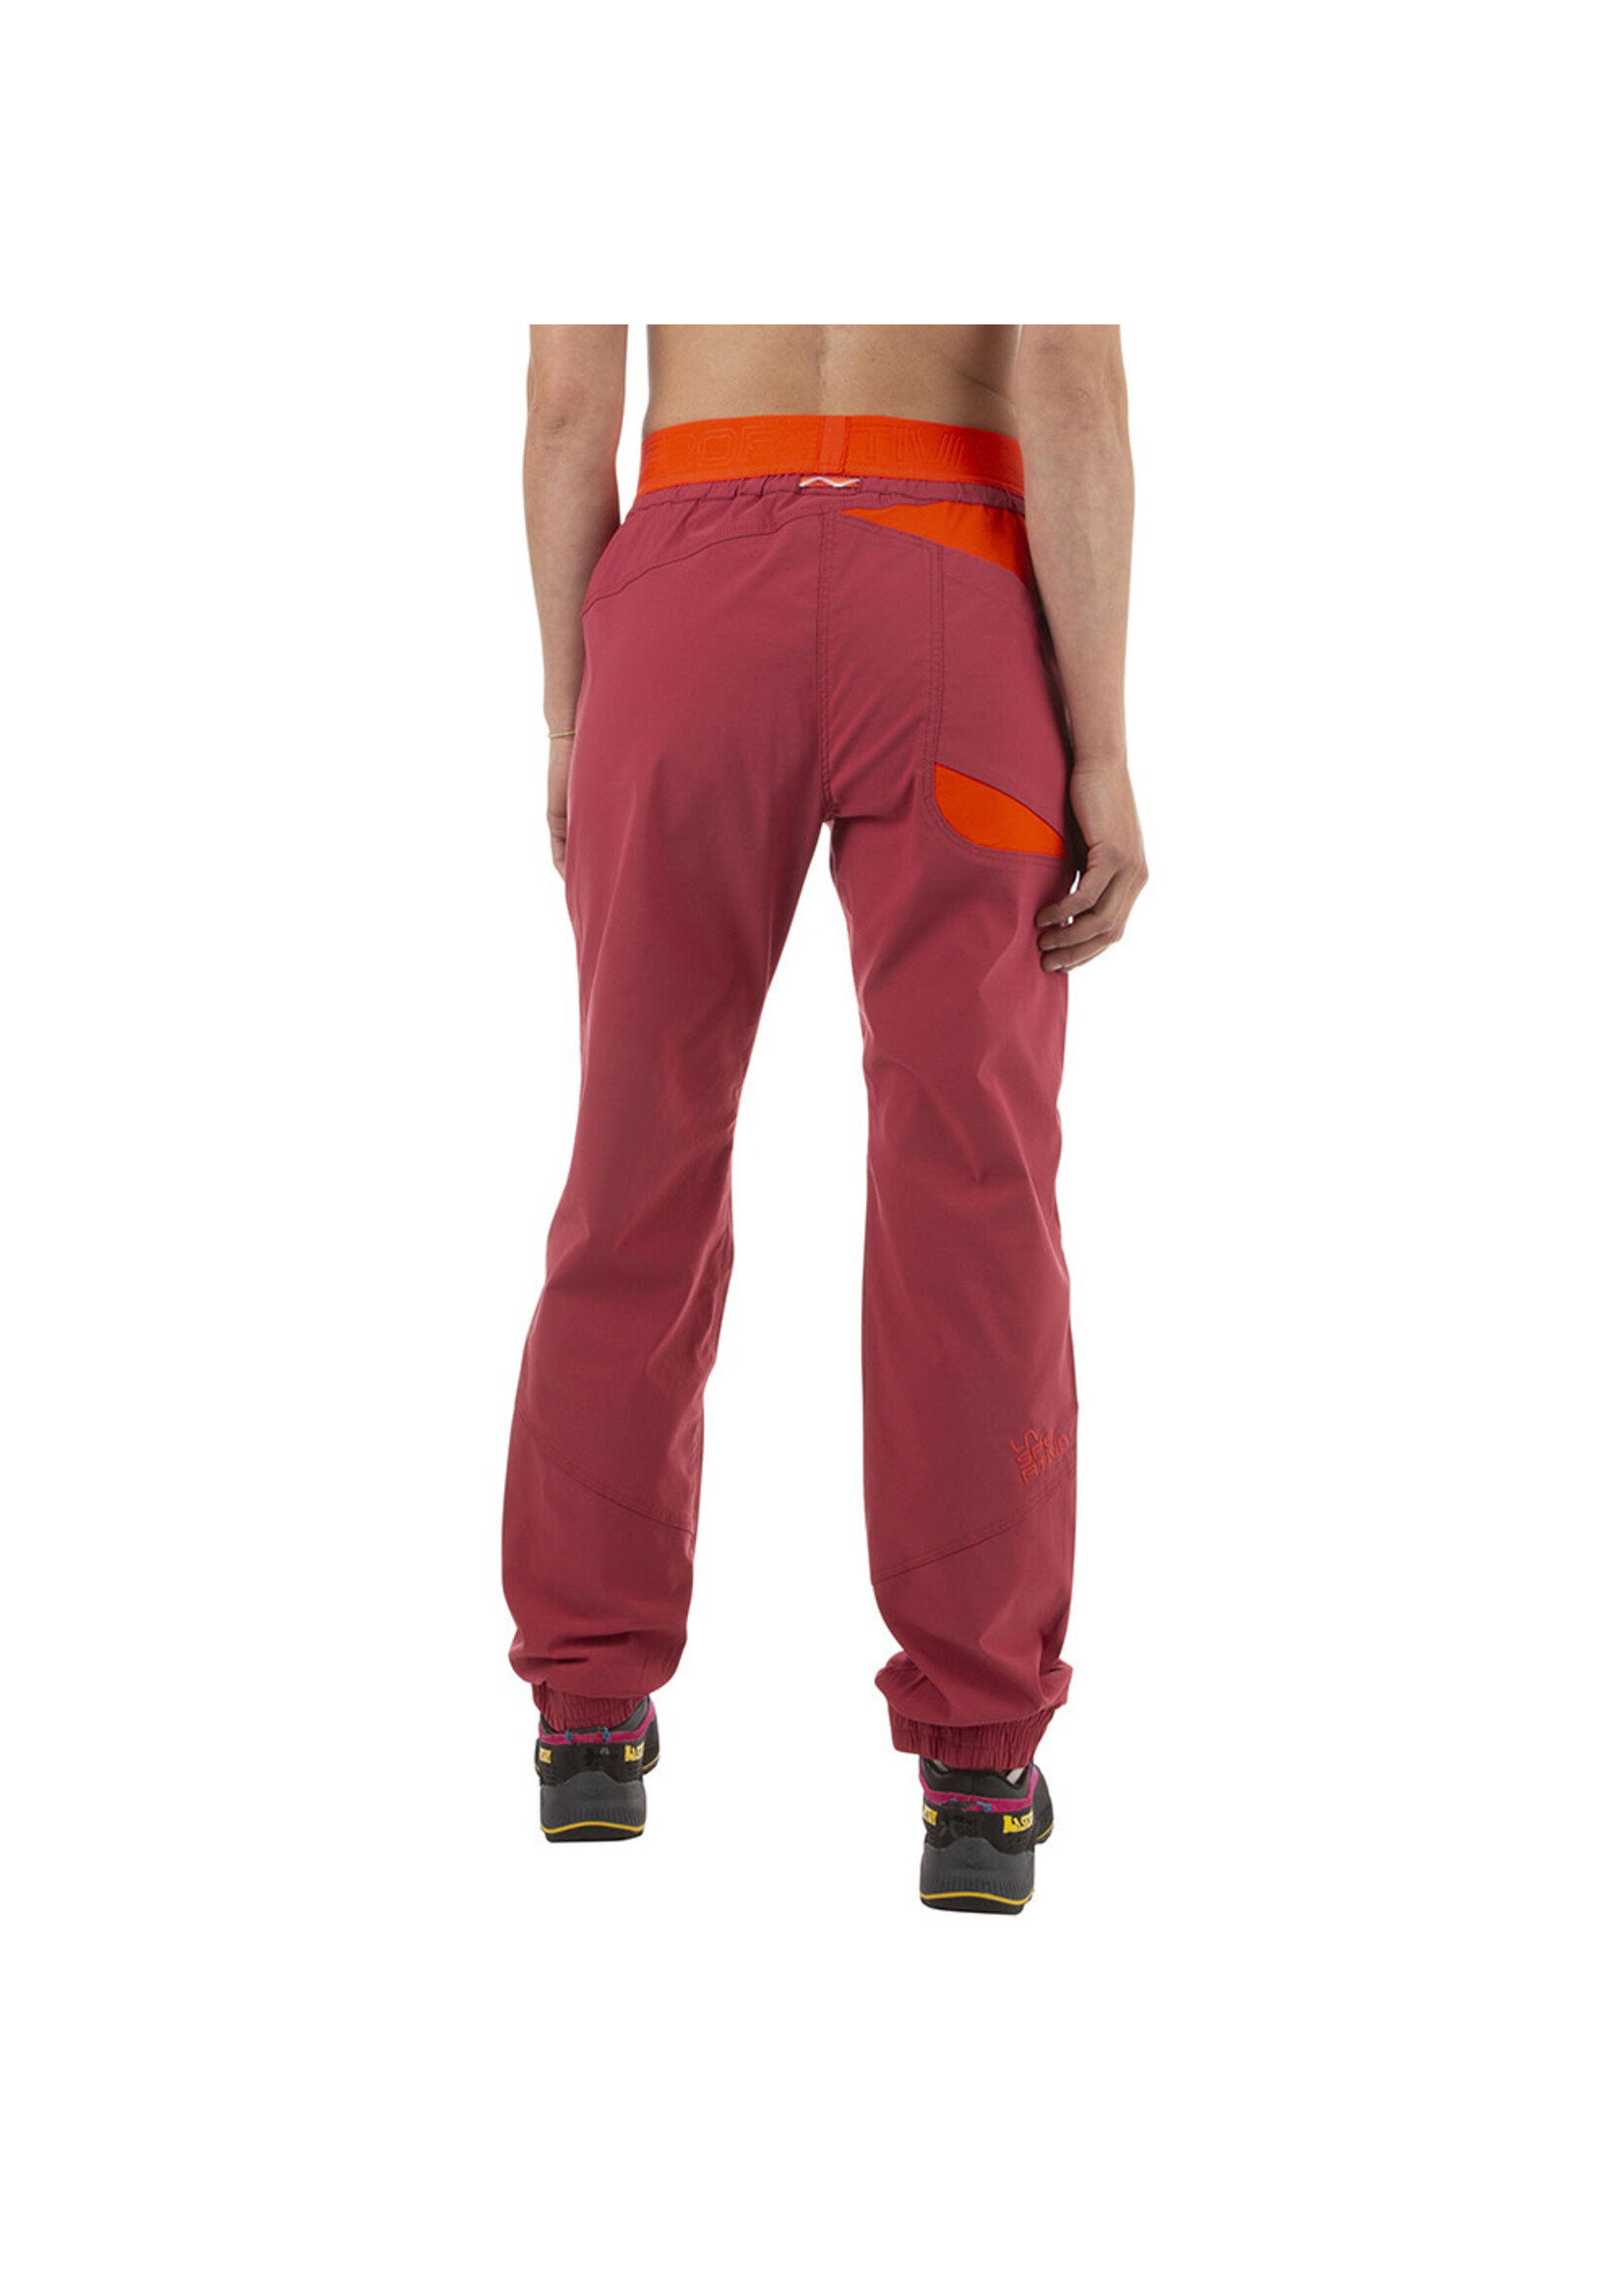 La Sportiva Mantra Short - Women's  Outdoor Clothing & Gear For Skiing,  Camping And Climbing